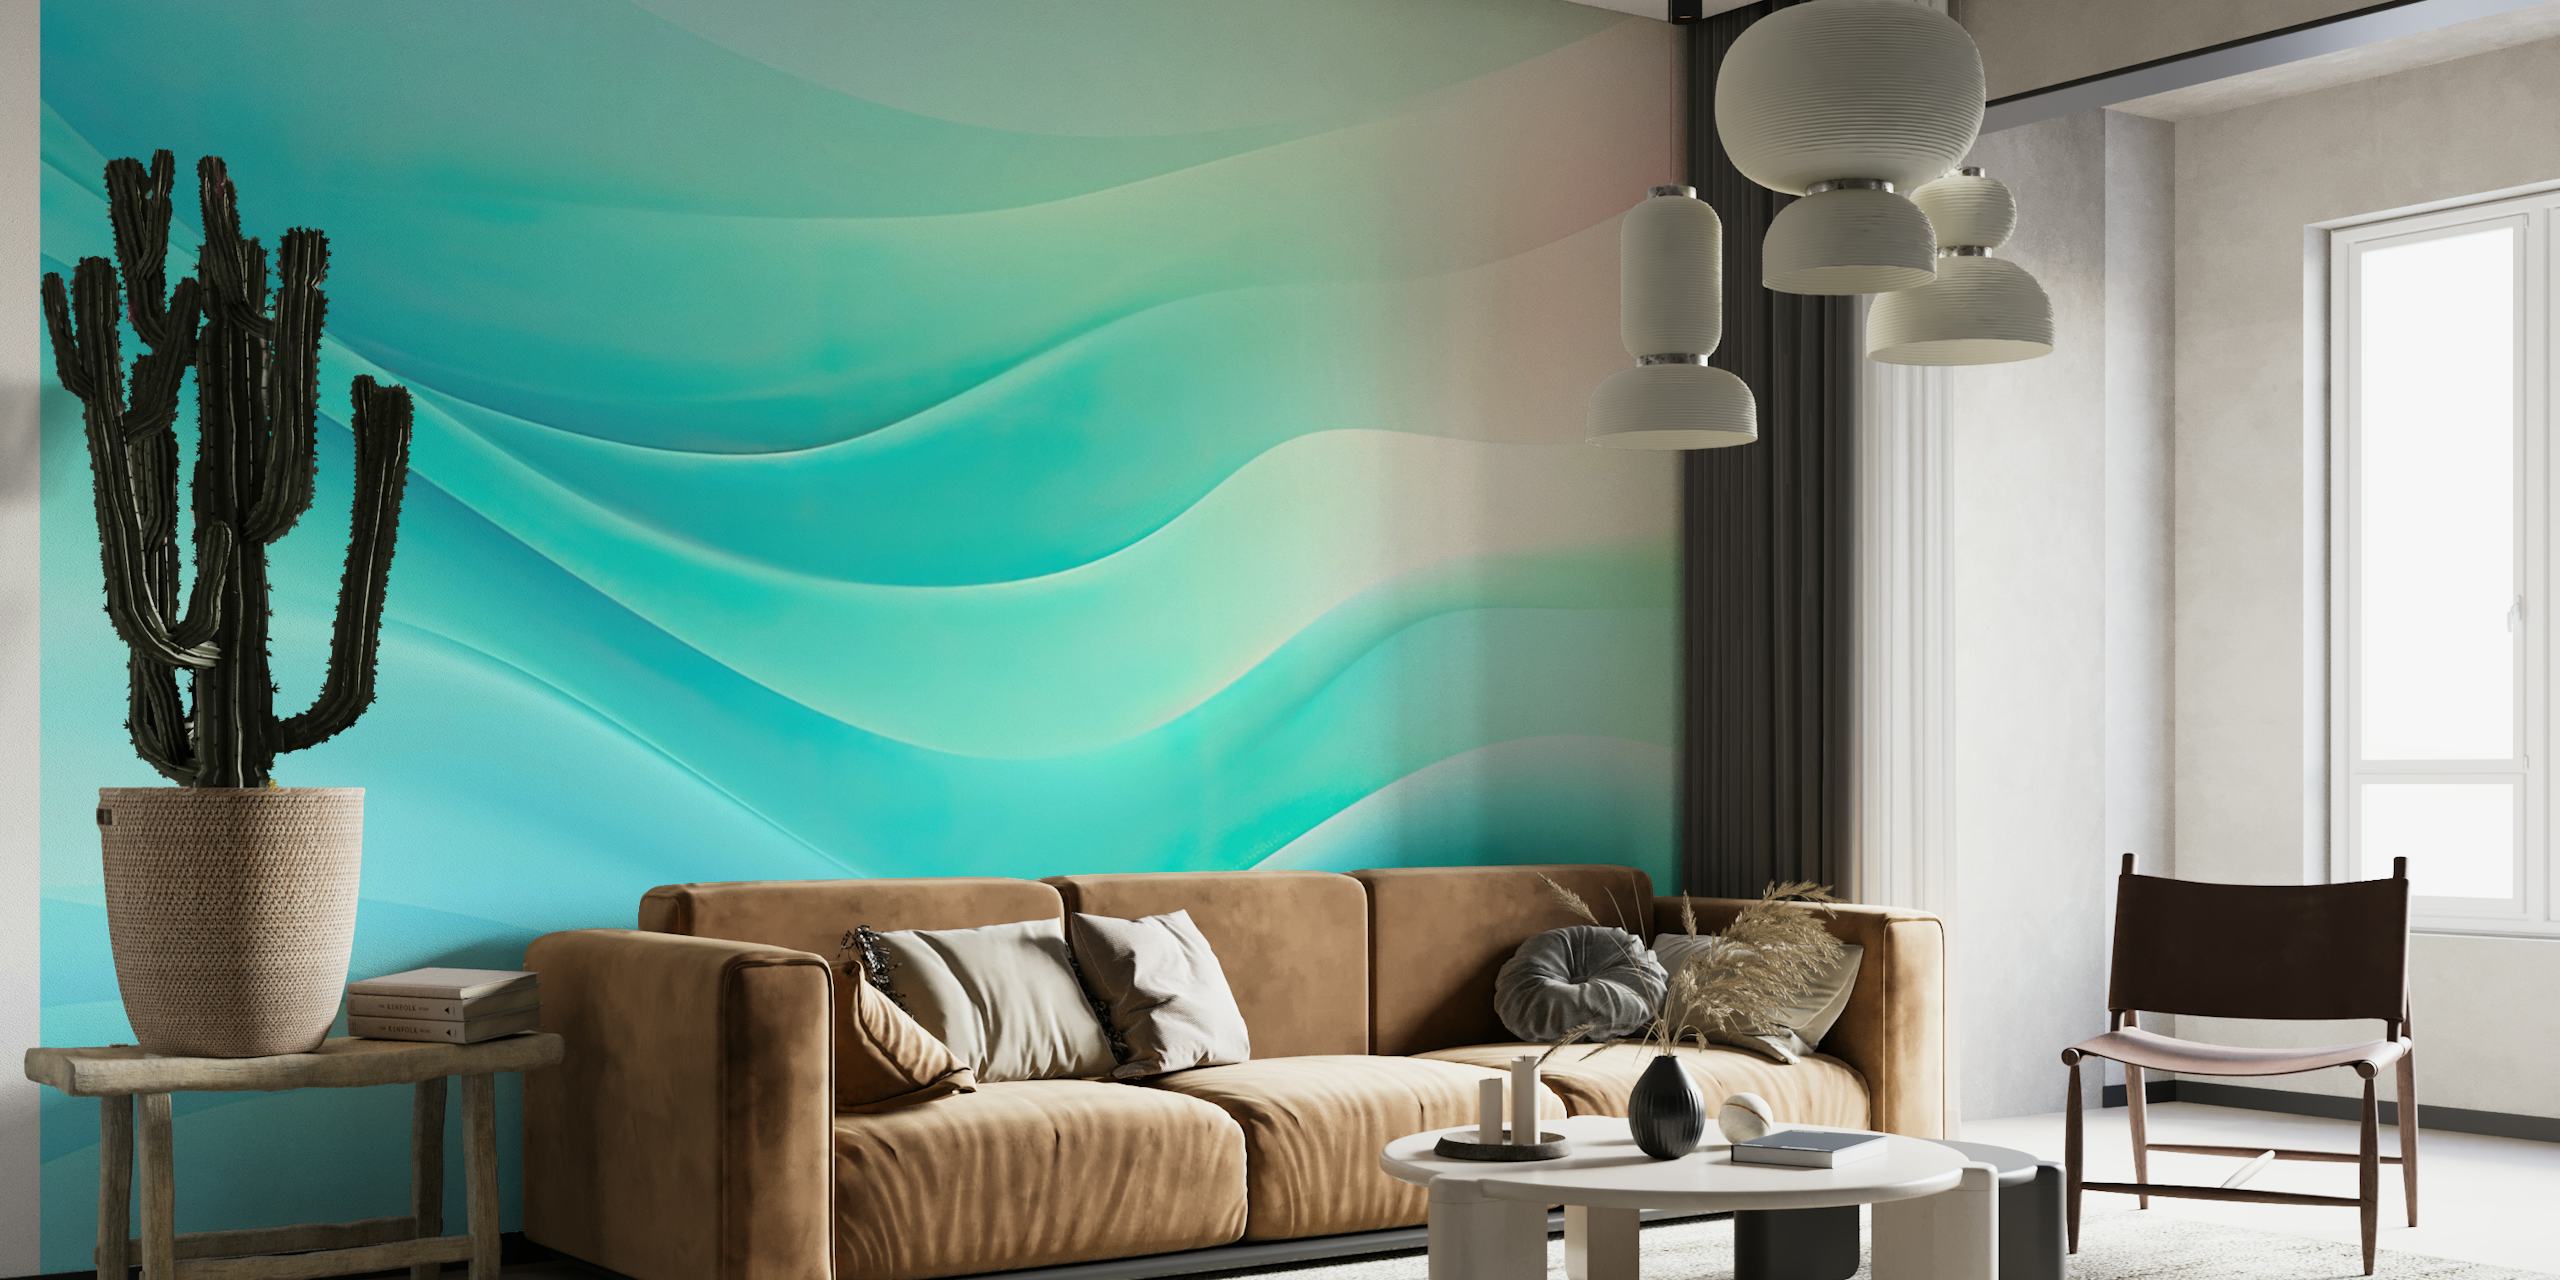 Soothing Calm Aqua Waves Turquoise wallpaper